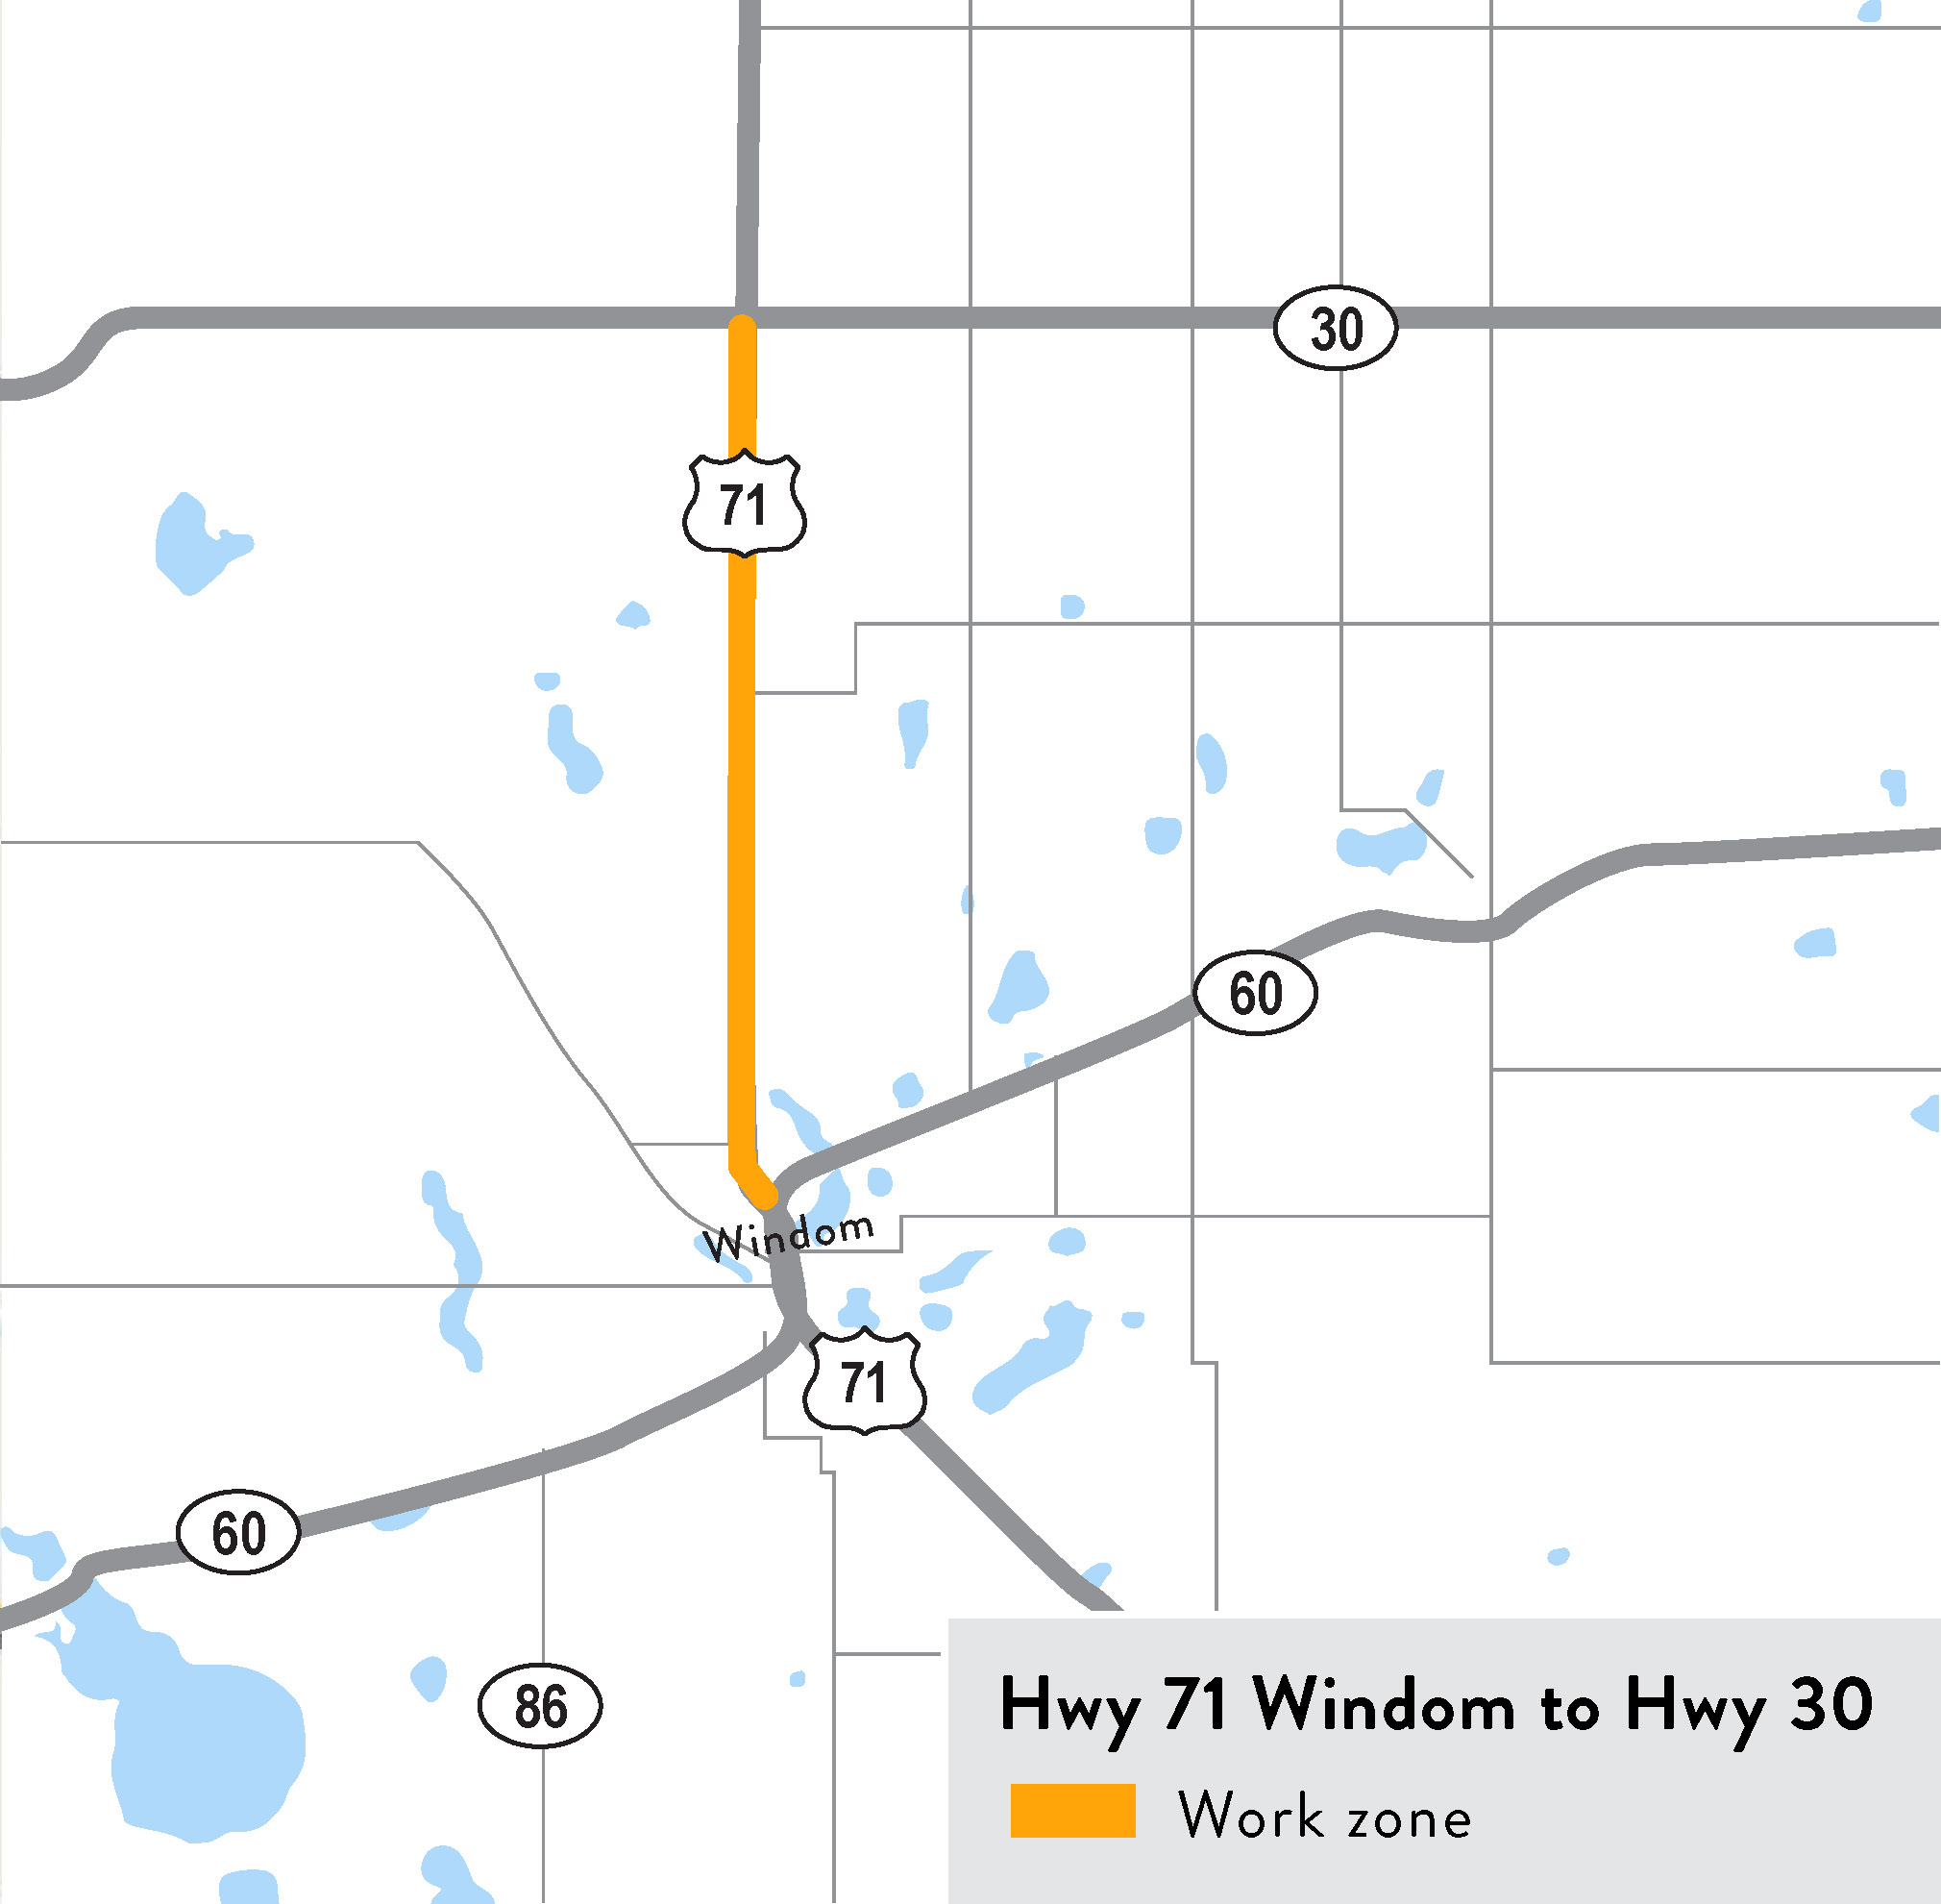 Hwy 71 Windom to Hwy 30 map